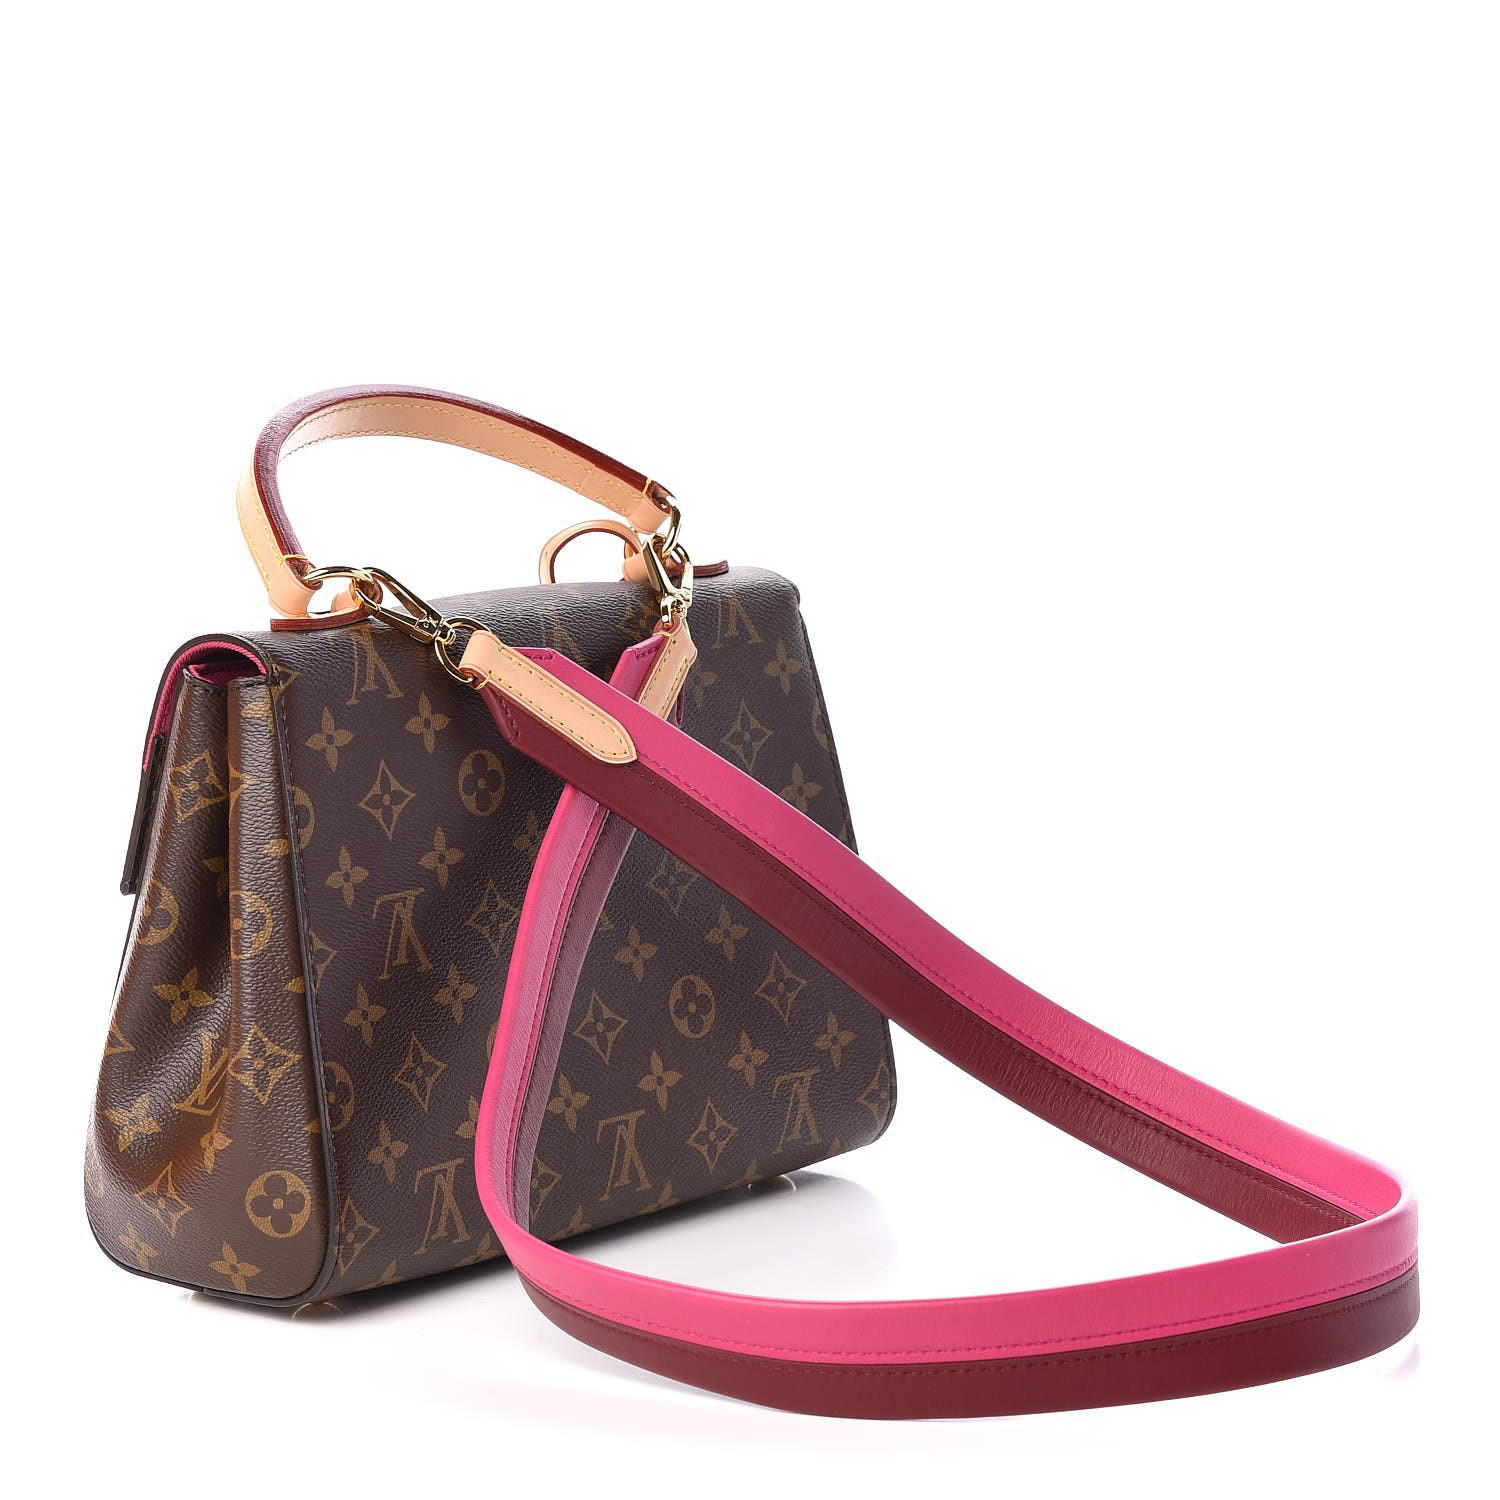 Lv Cluny Bag Review  Natural Resource Department